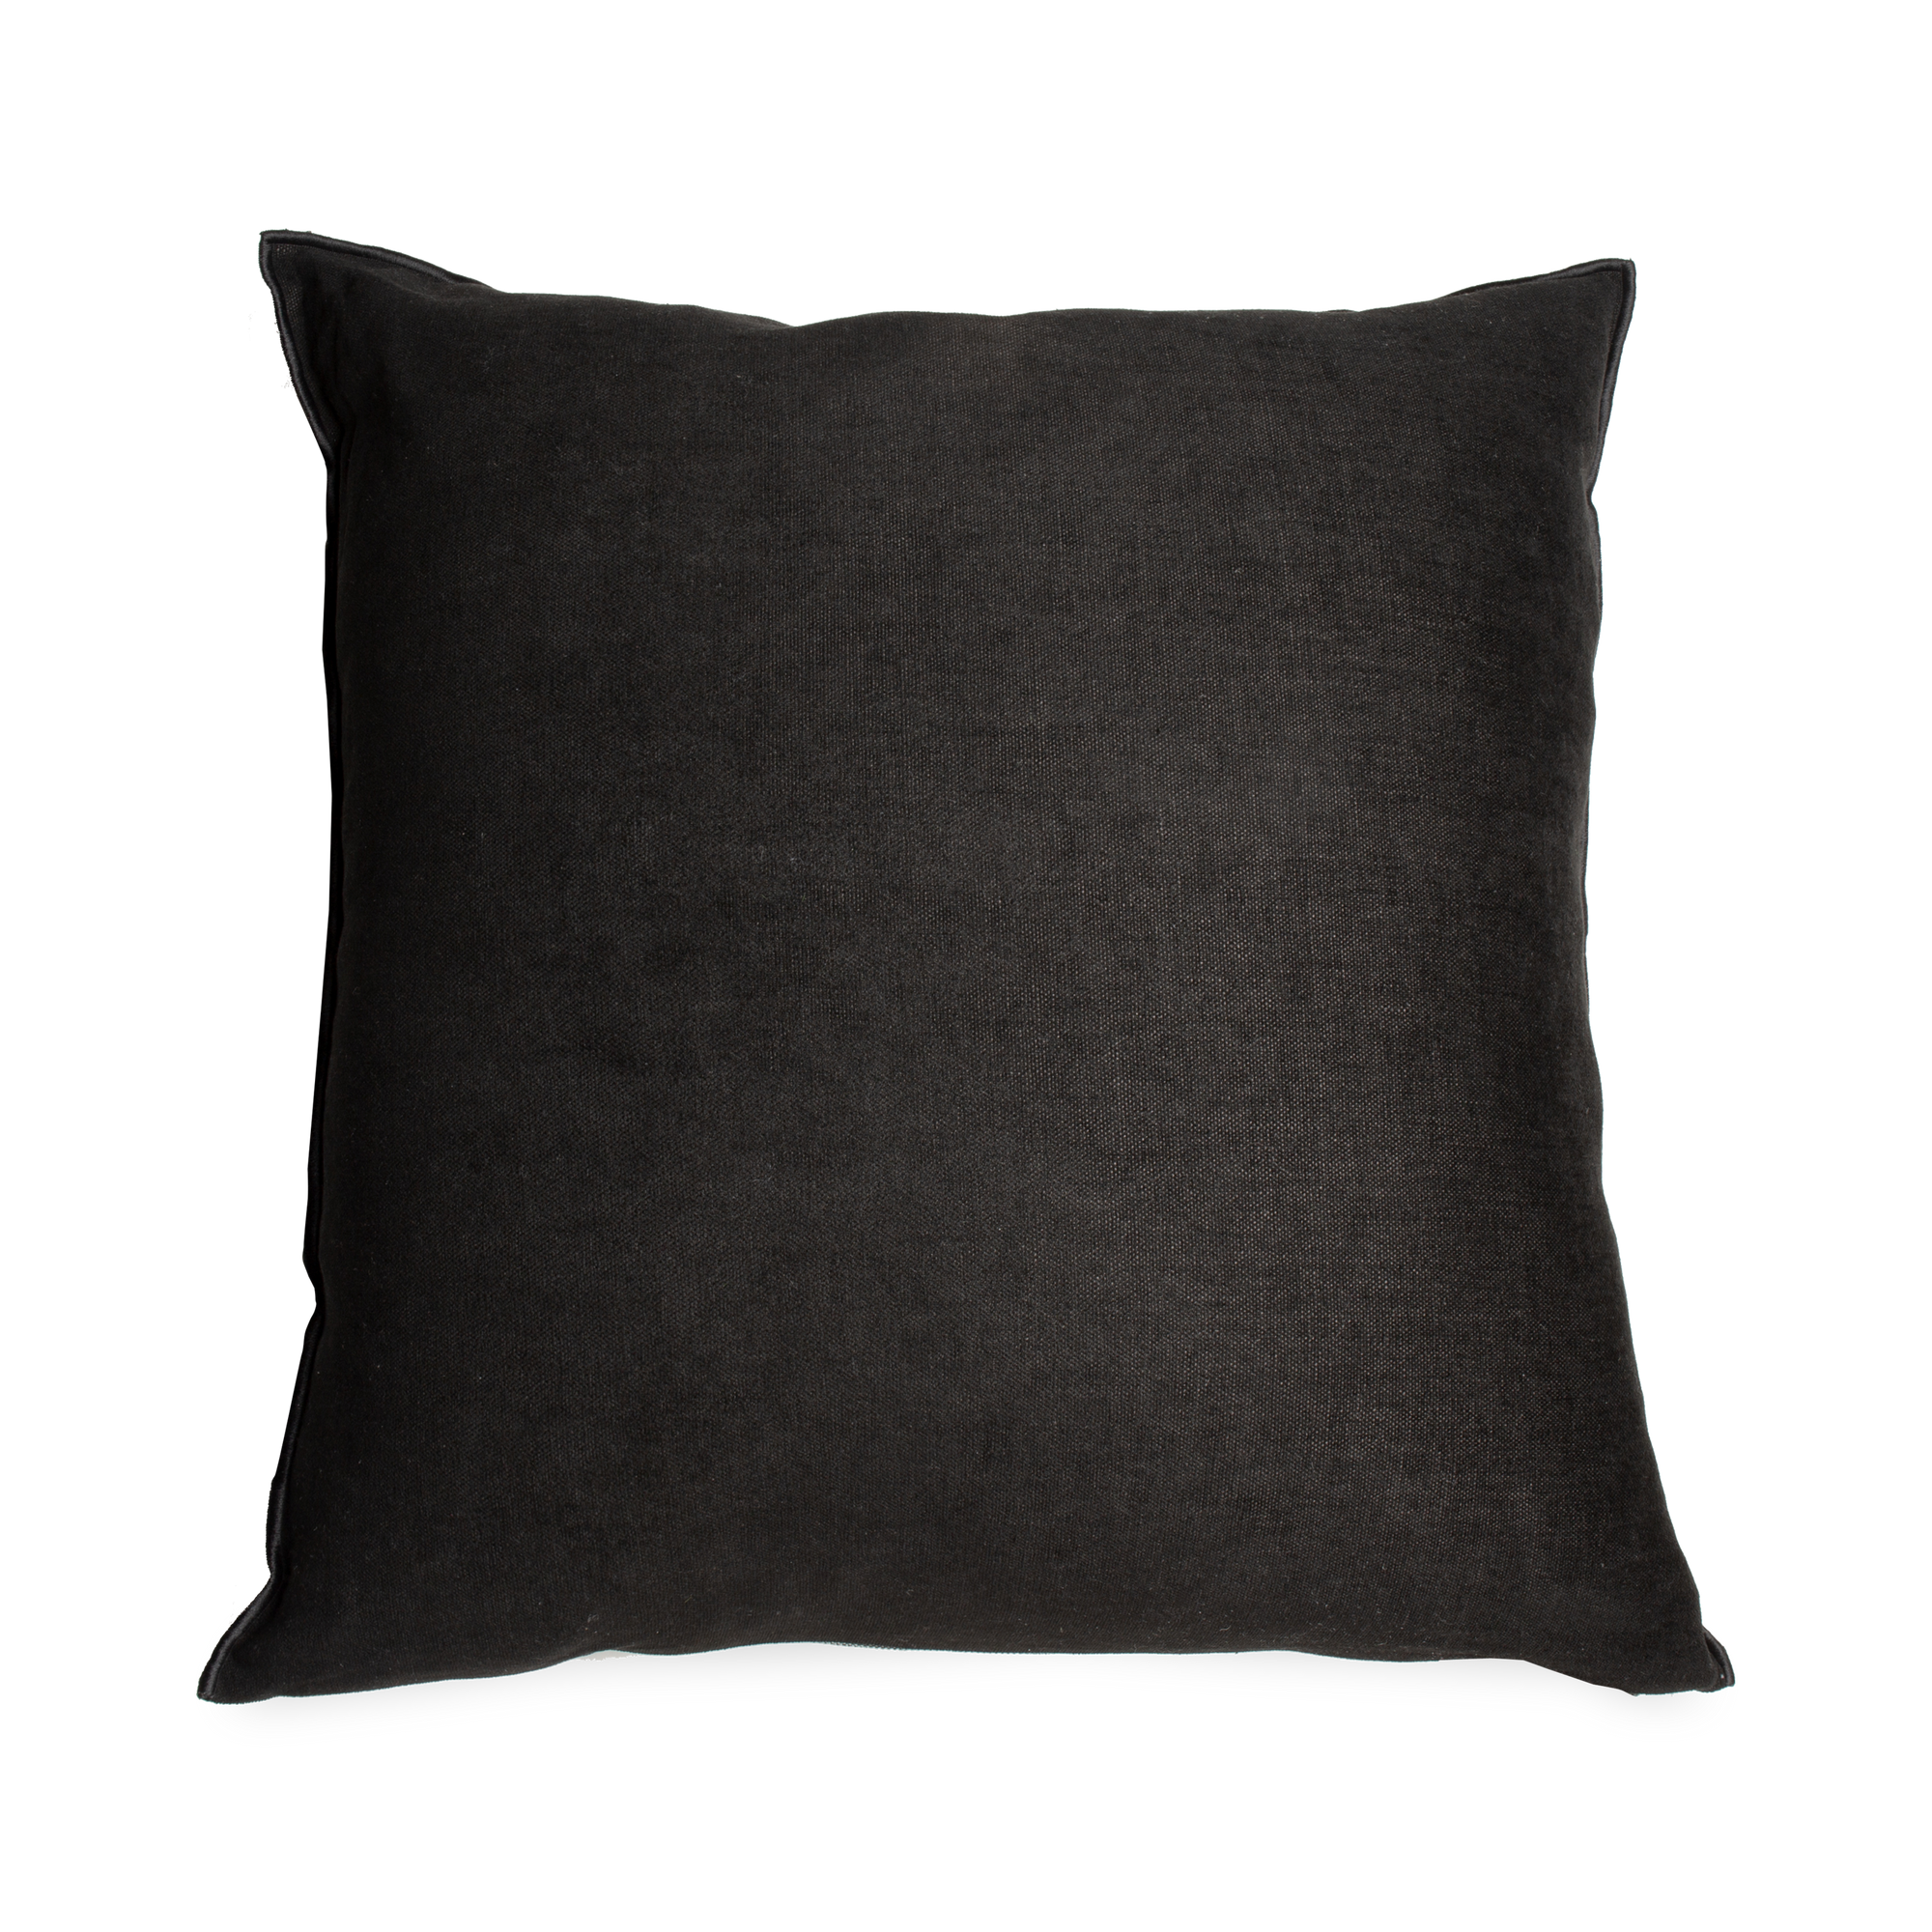 Simple and elegant, the Chenille Pillow focuses on textural appeal to elevate your space.